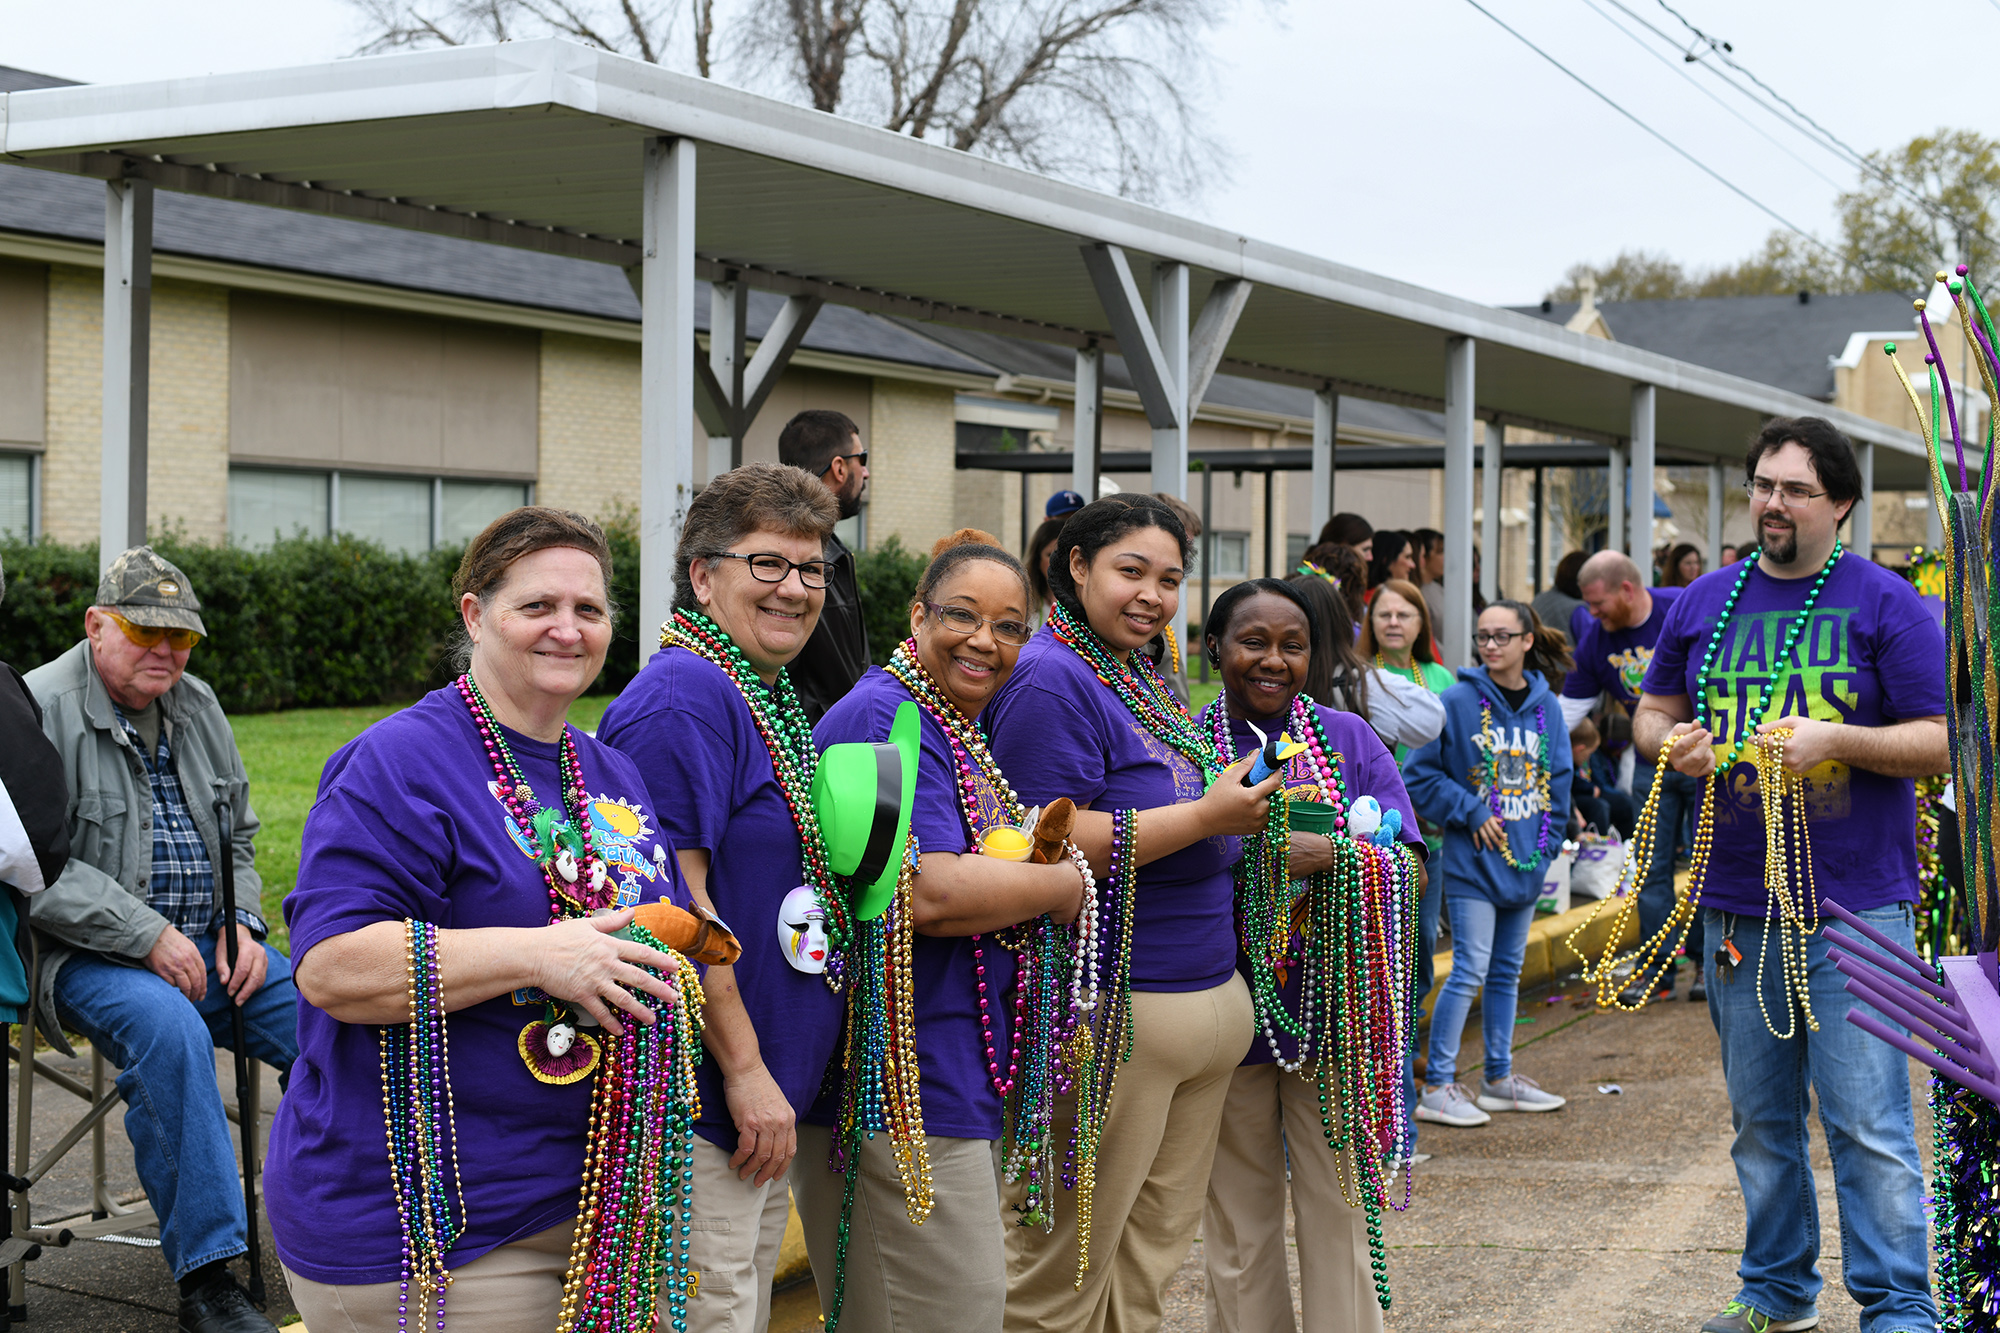 Our Lady of Prompt Succor School in Alexandria held their annual Pre-K Mardi Gras Parade on Mar. 1.  The entire student body, faculty and parents line up to catch beads and trinkets as the Pre-K classes parade down 21st Street in front of the school. Also participating were the Penny Kings, Queen, Prince, and Princess from Fall Festival, and the 2018 ReProm King and Queen.
OLPS Staff laissez les bons temps rouler!